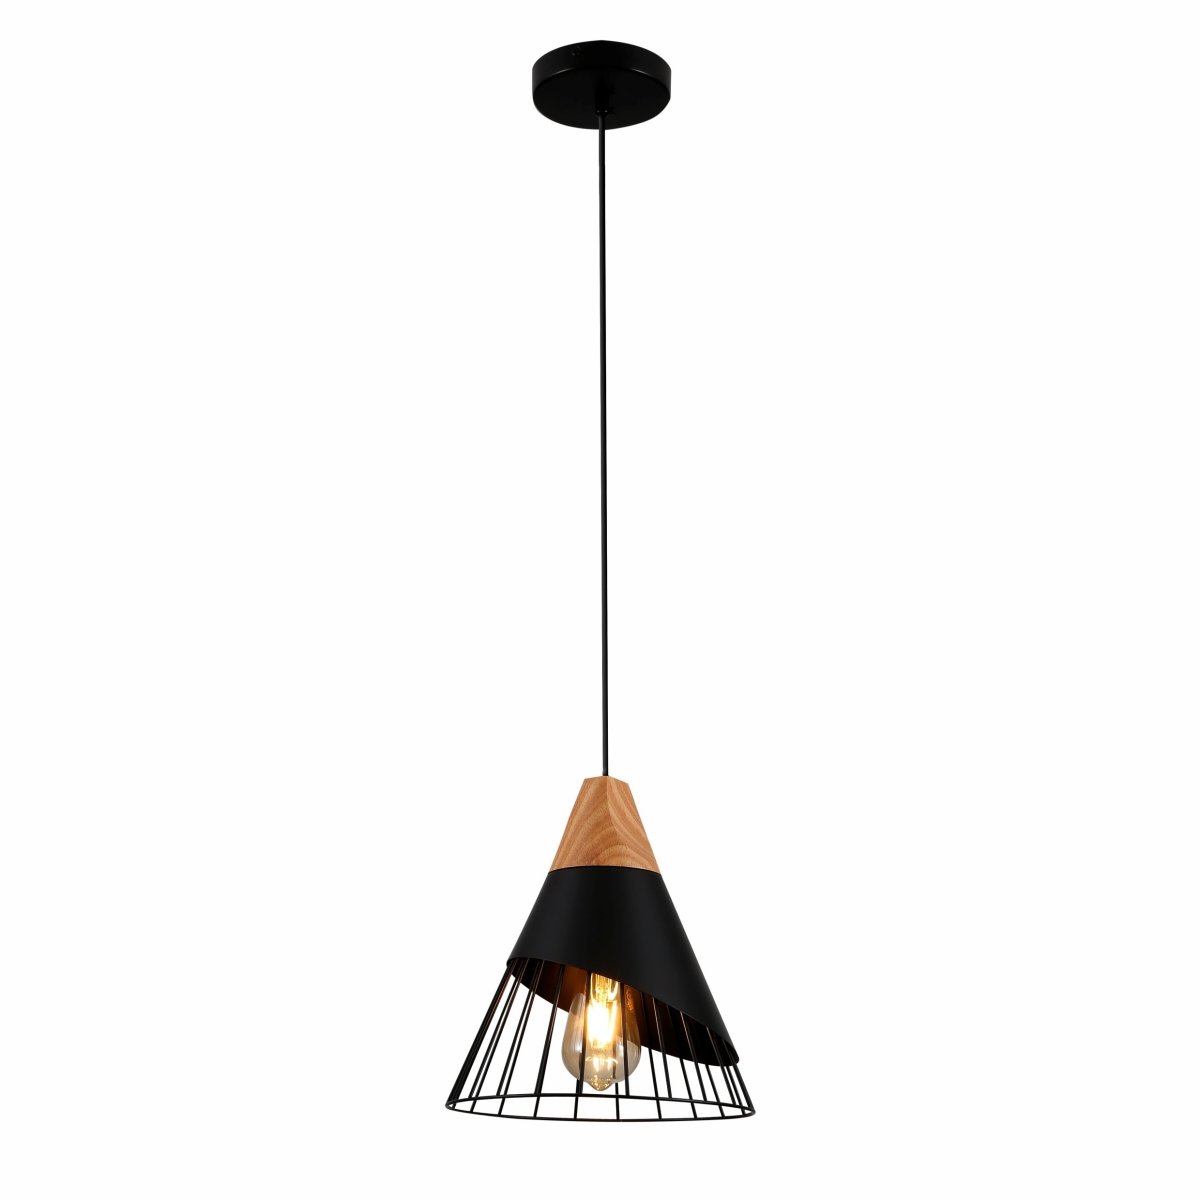 Main image of Black Wood Funnel Cone Caged Shuttlecock Nordic Metal Ceiling Pendant Light with E27 Fitting | TEKLED 150-18390